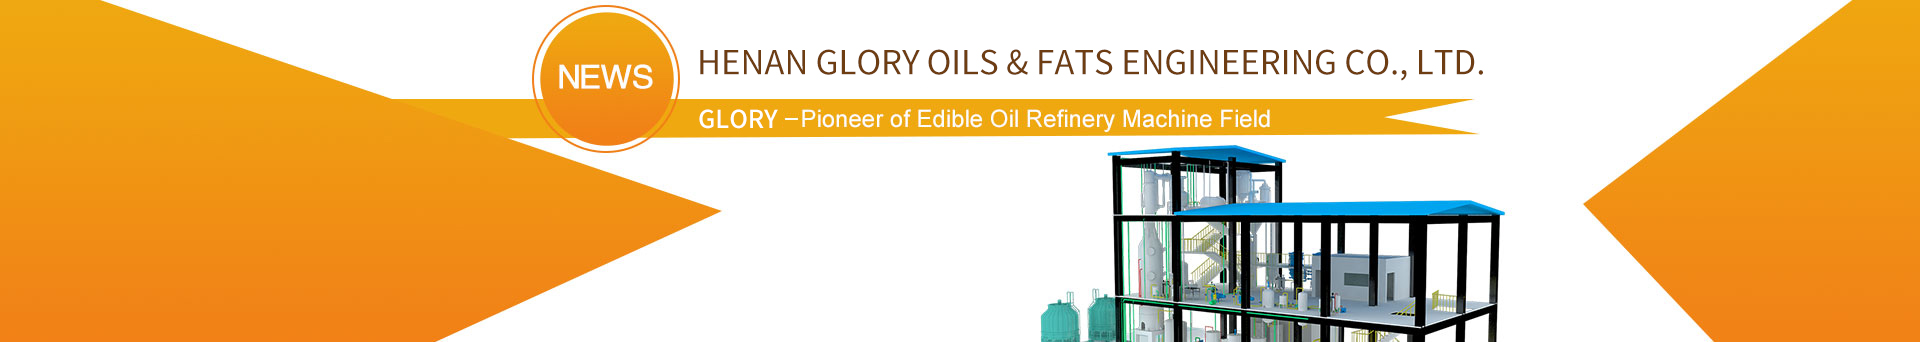 edible oil refinery industry news